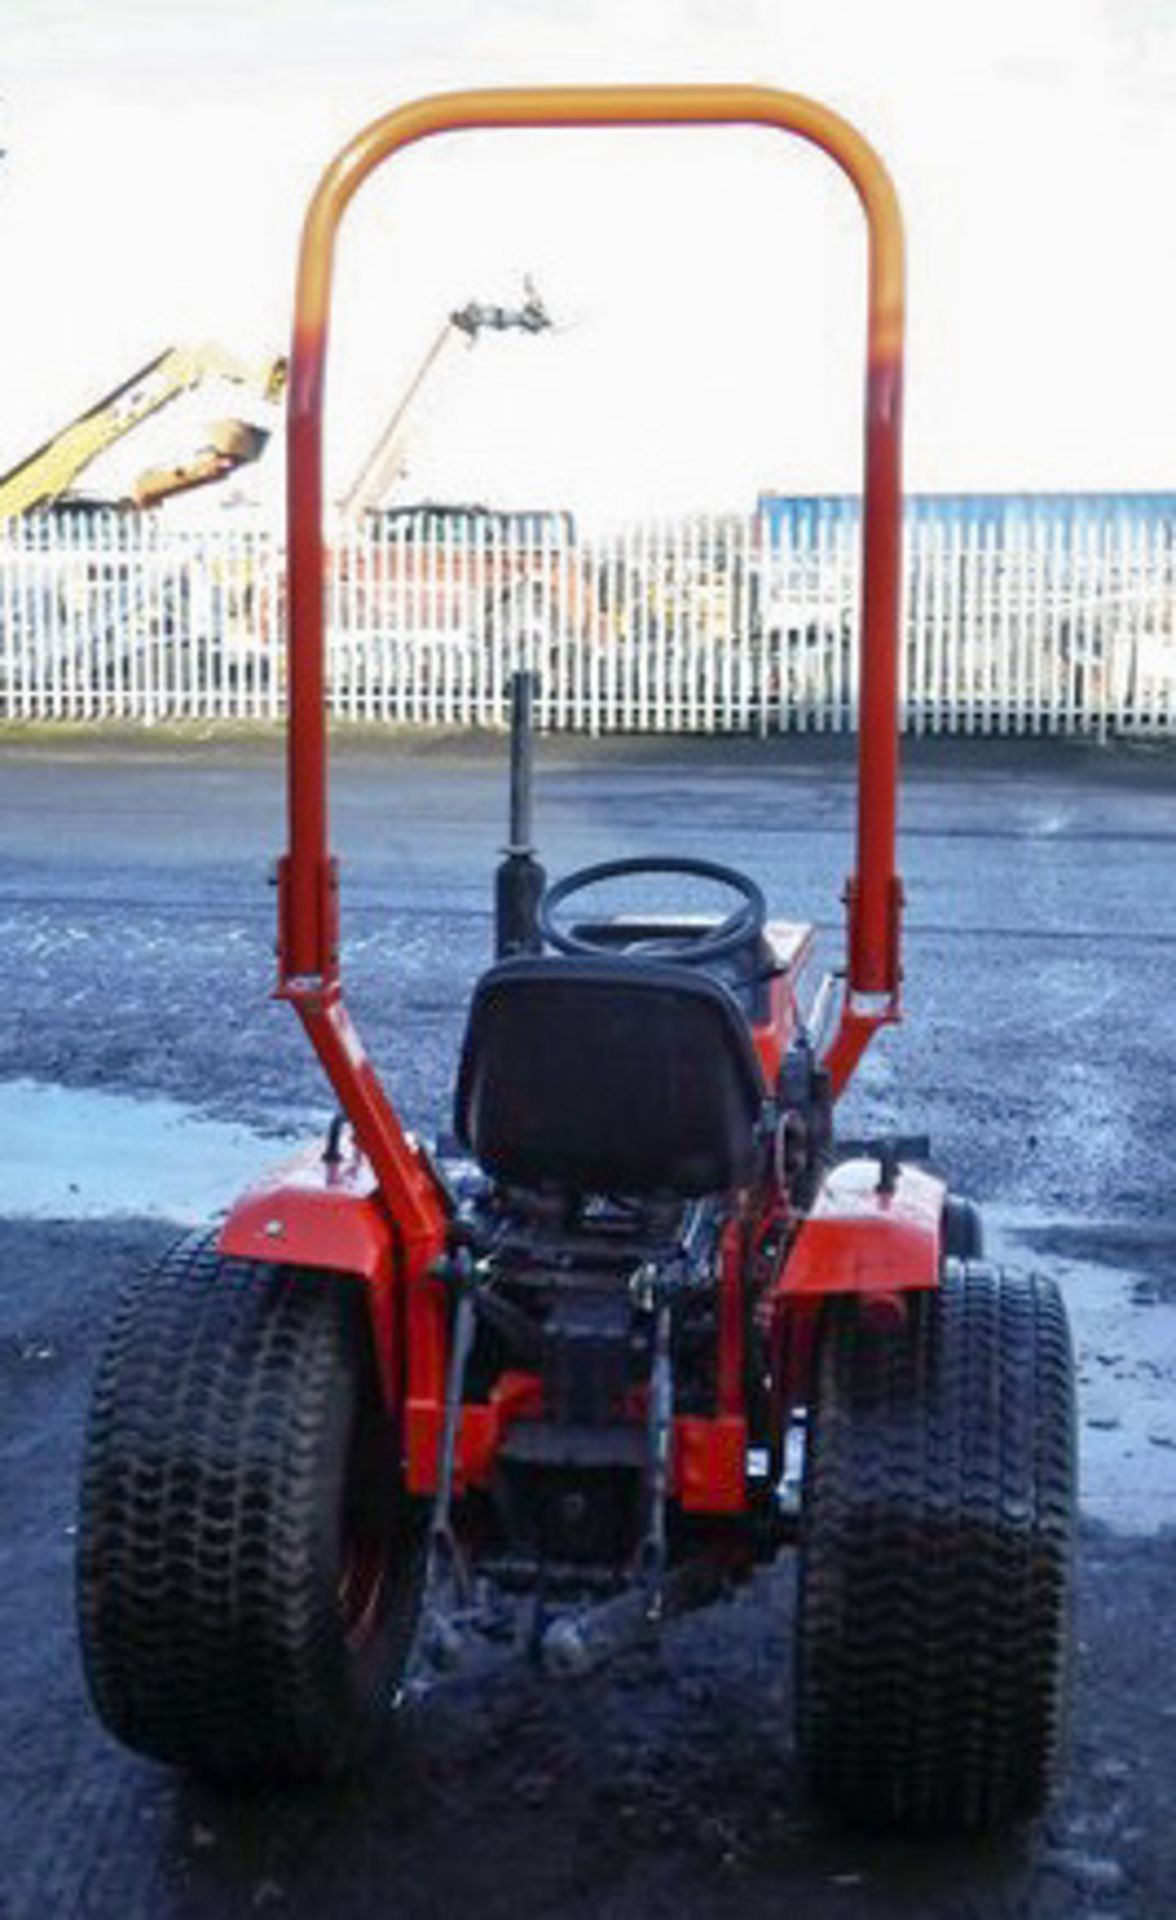 1998 (APPROX) B1750 TRACTOR SN 65435. 20HP 4 WHEEL DRIVE TURF TYRES PTO AND 3 POINT LINKAGE. 665 H - Image 3 of 9